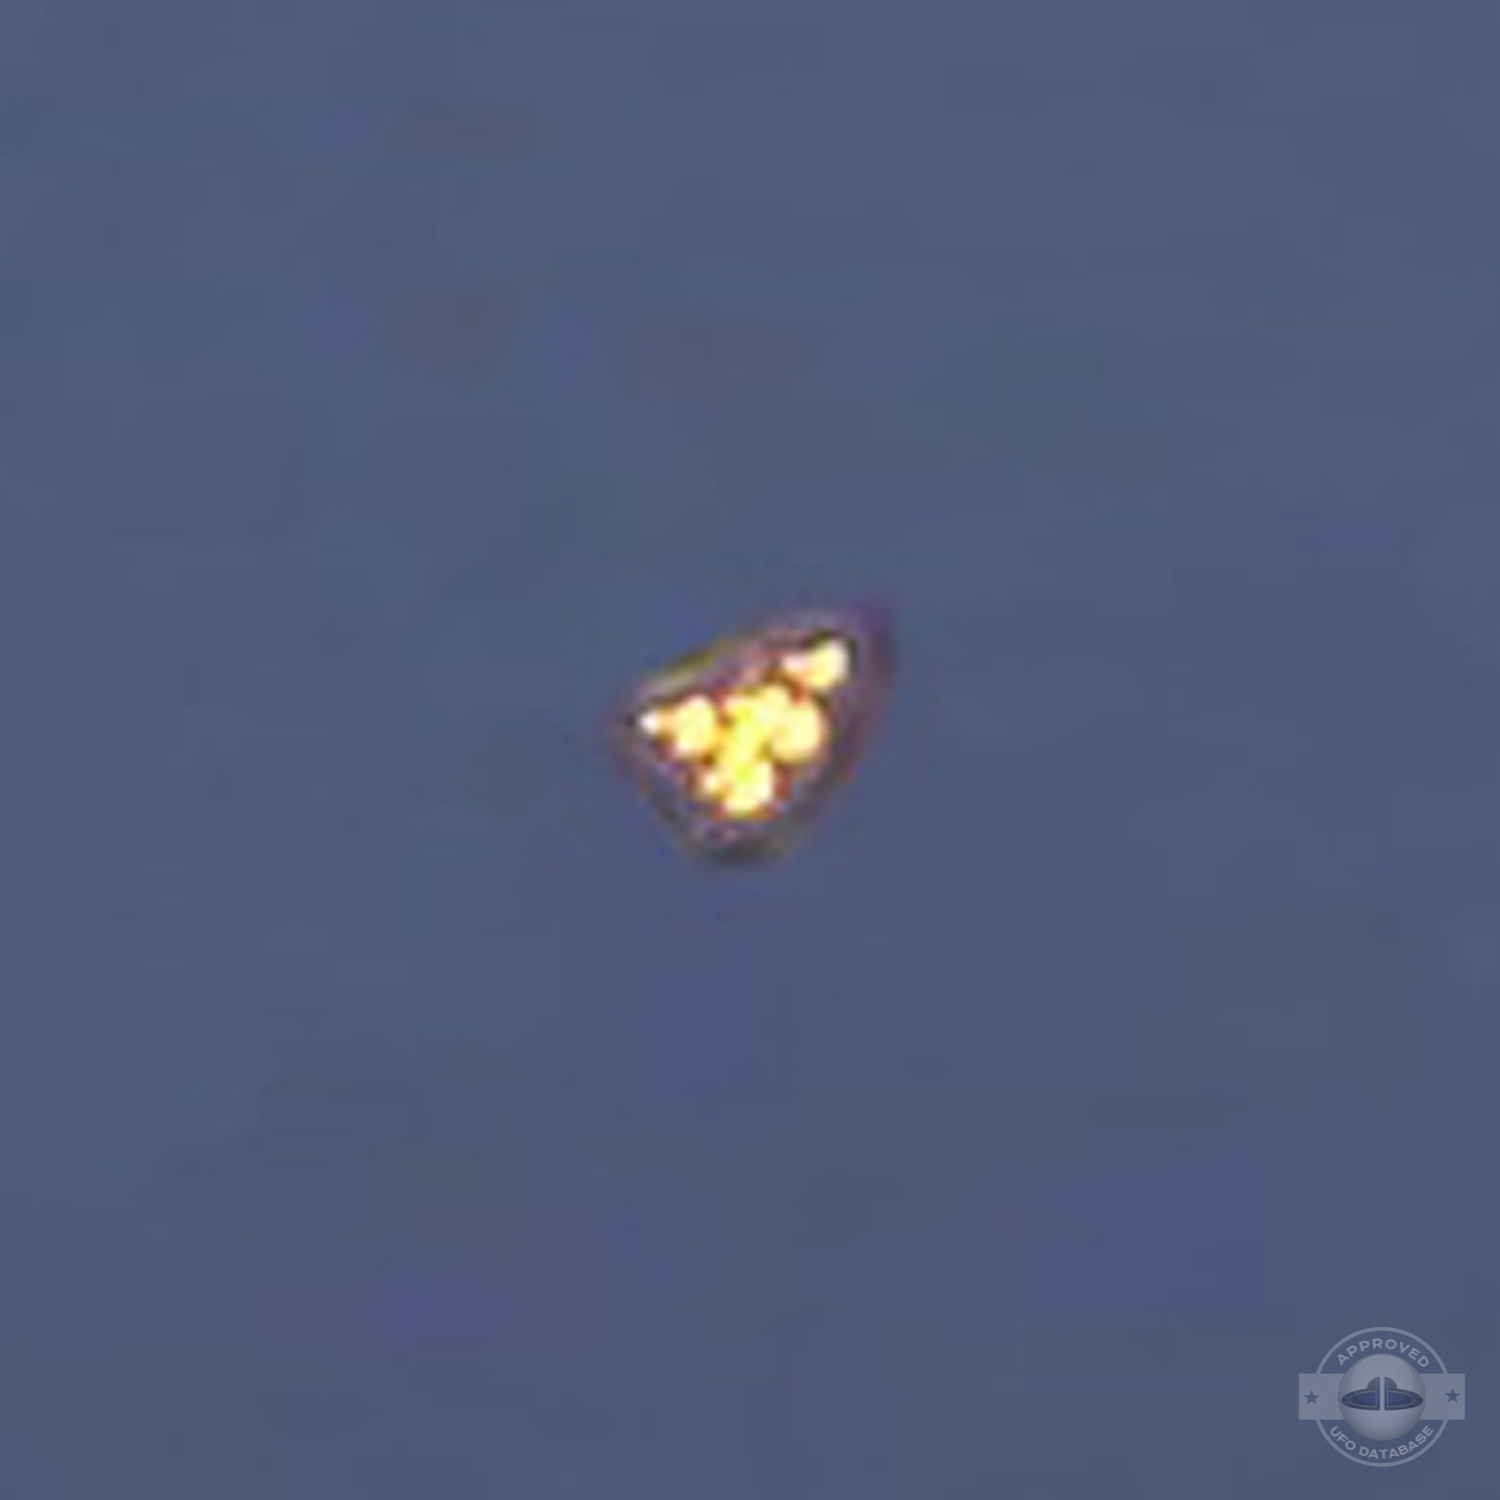 UFO seen by hundreds in Vladivostok | Russia UFO picture | 2010 UFO Picture #167-6